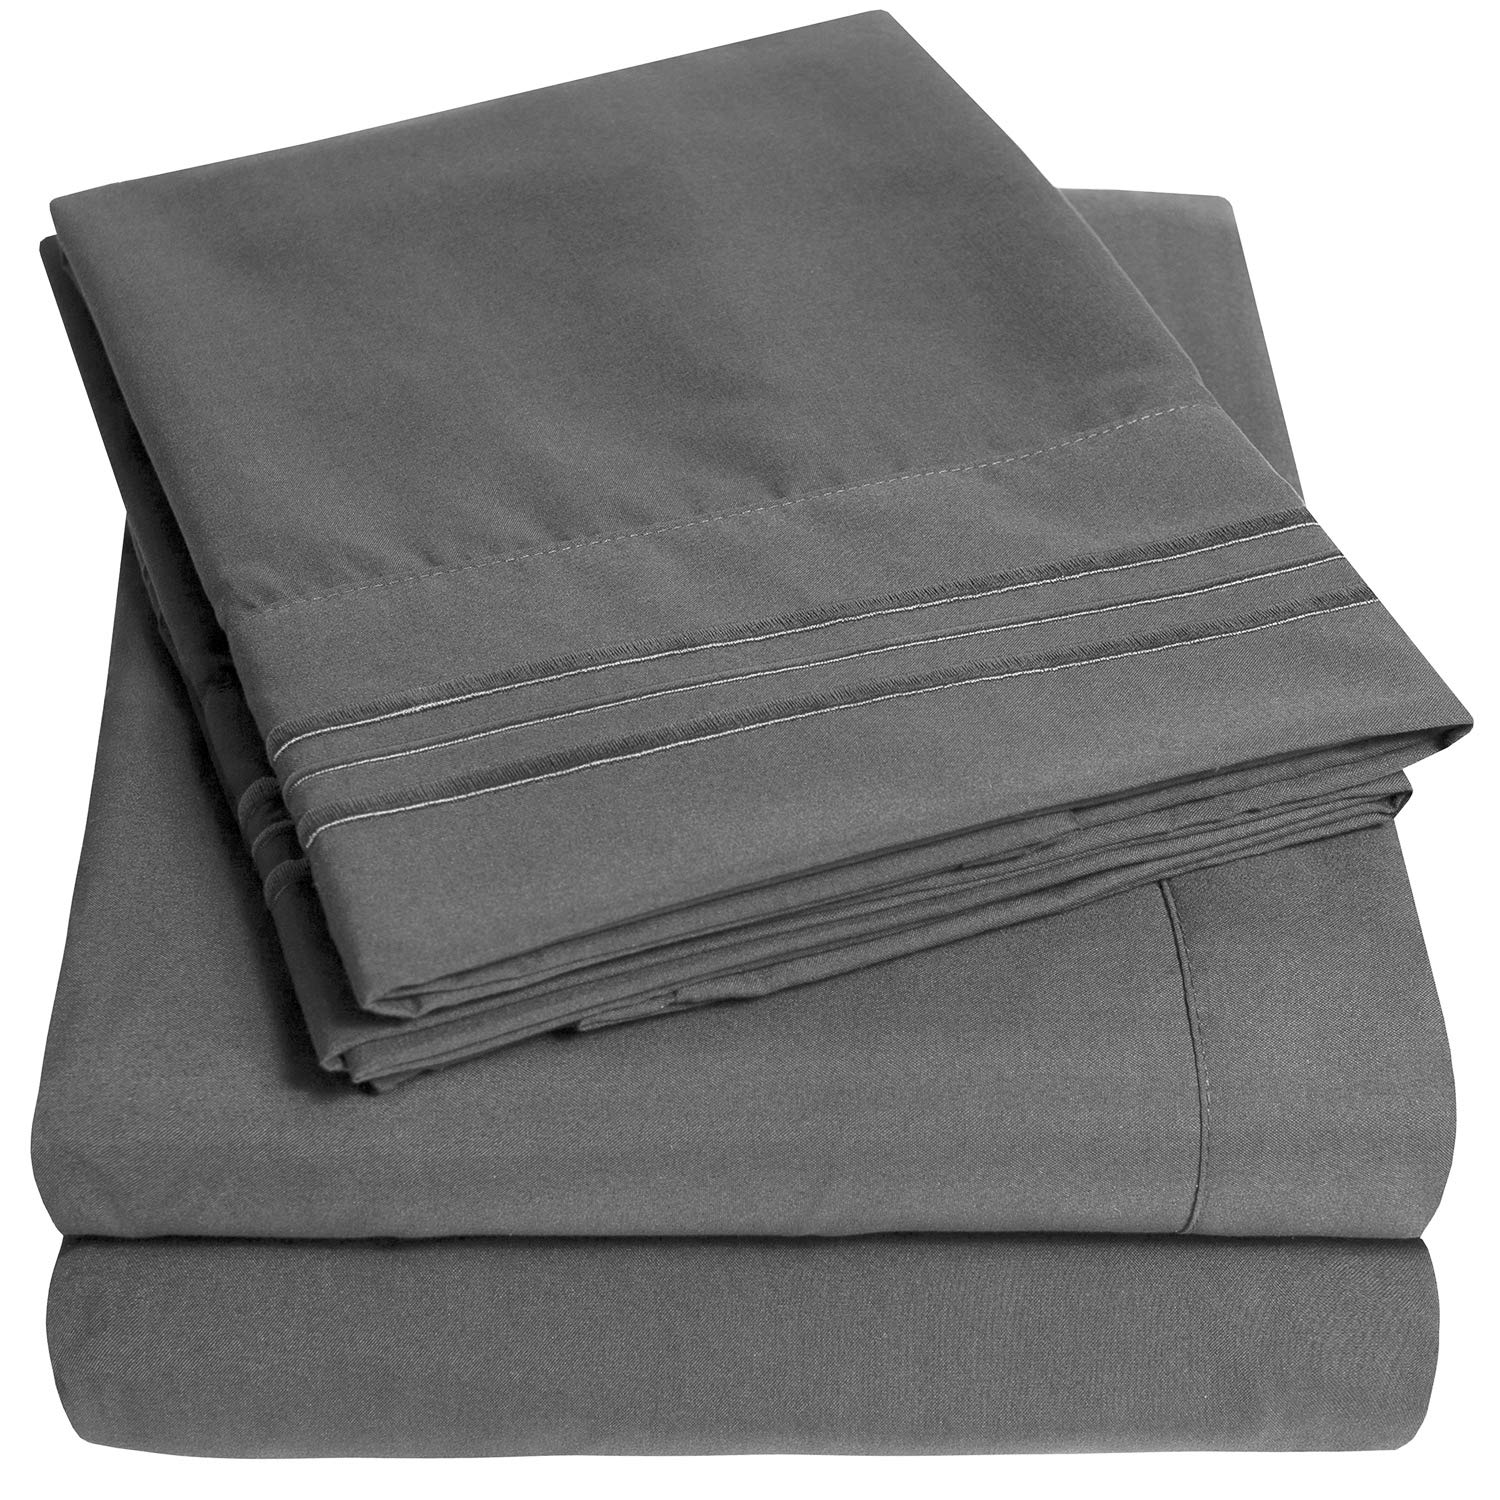 Book Cover 1500 Supreme Collection Bed Sheet Set - Extra Soft, Elastic Corner Straps, Deep Pockets, Wrinkle & Fade Resistant Sheets Set, Luxury Hotel Bedding, Full, Gray